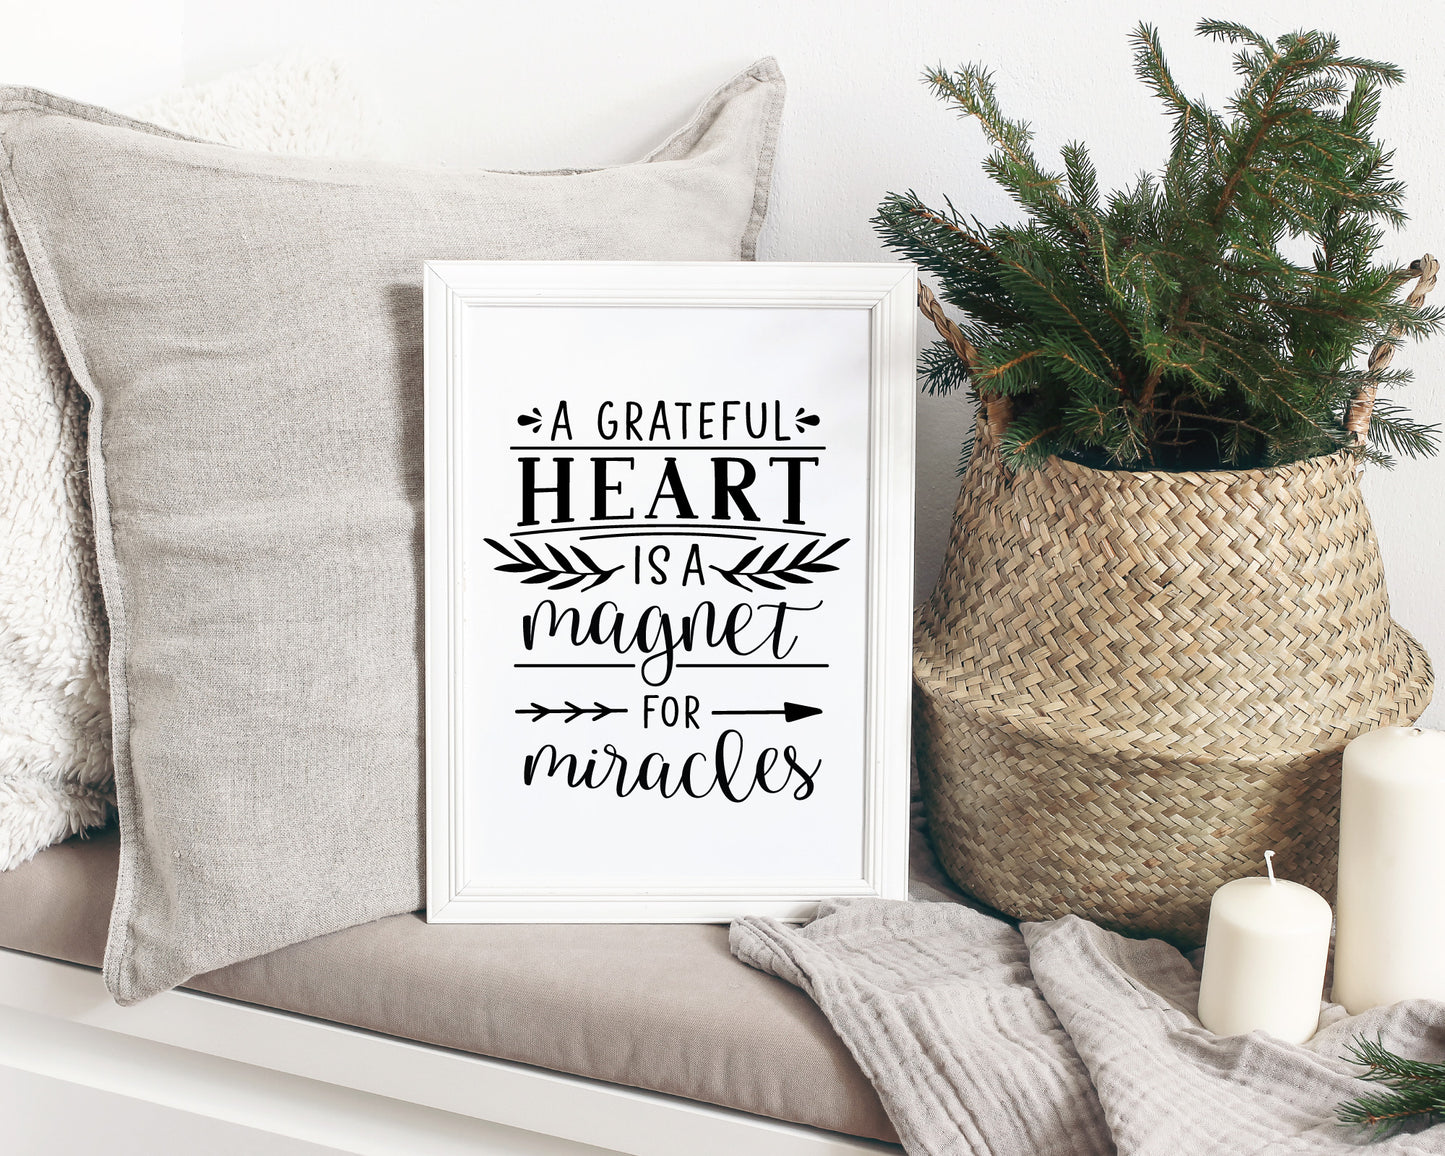 Thankful Quote SVG Bundle | 15 Pack